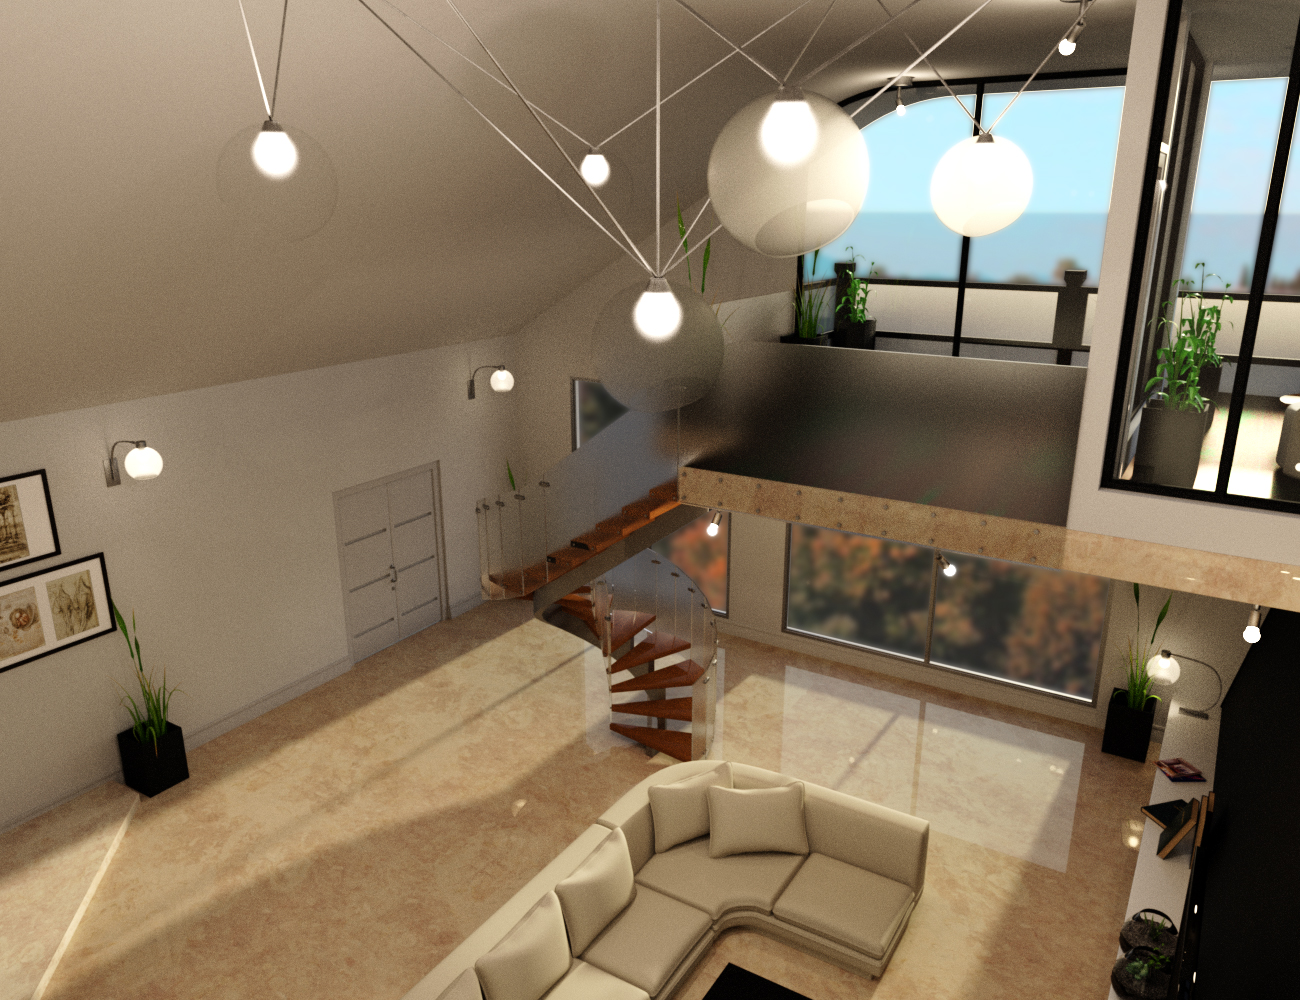 Upscale Apartment by: Val3dart, 3D Models by Daz 3D